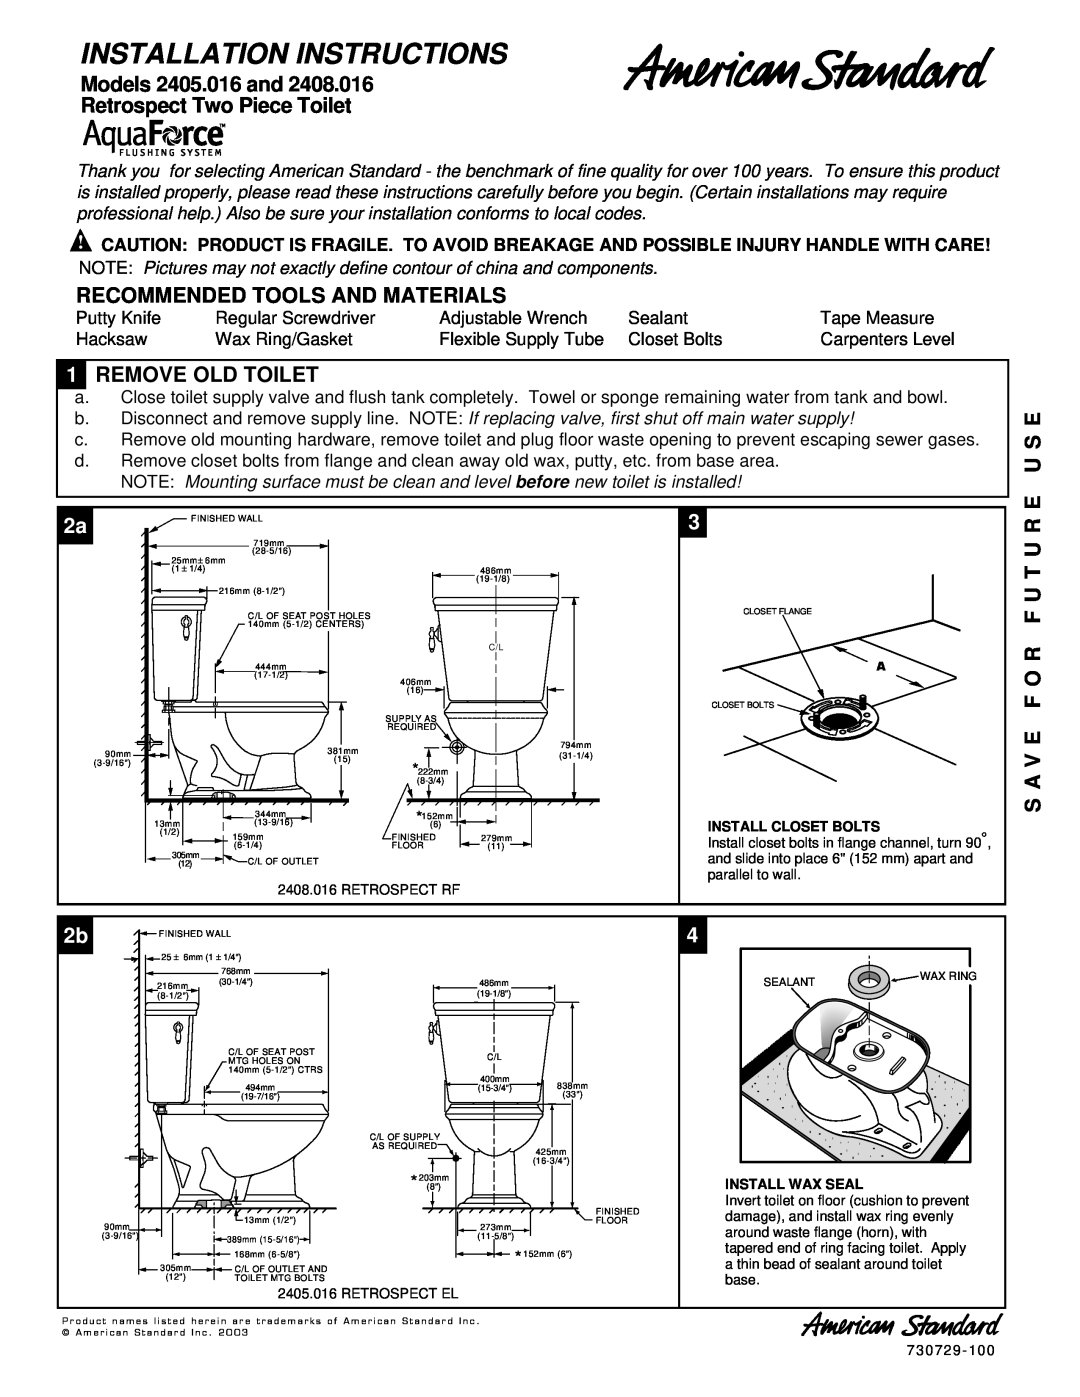 American Standard installation instructions Models 2405.016 and Retrospect Two Piece Toilet, 1REMOVE OLD TOILET 